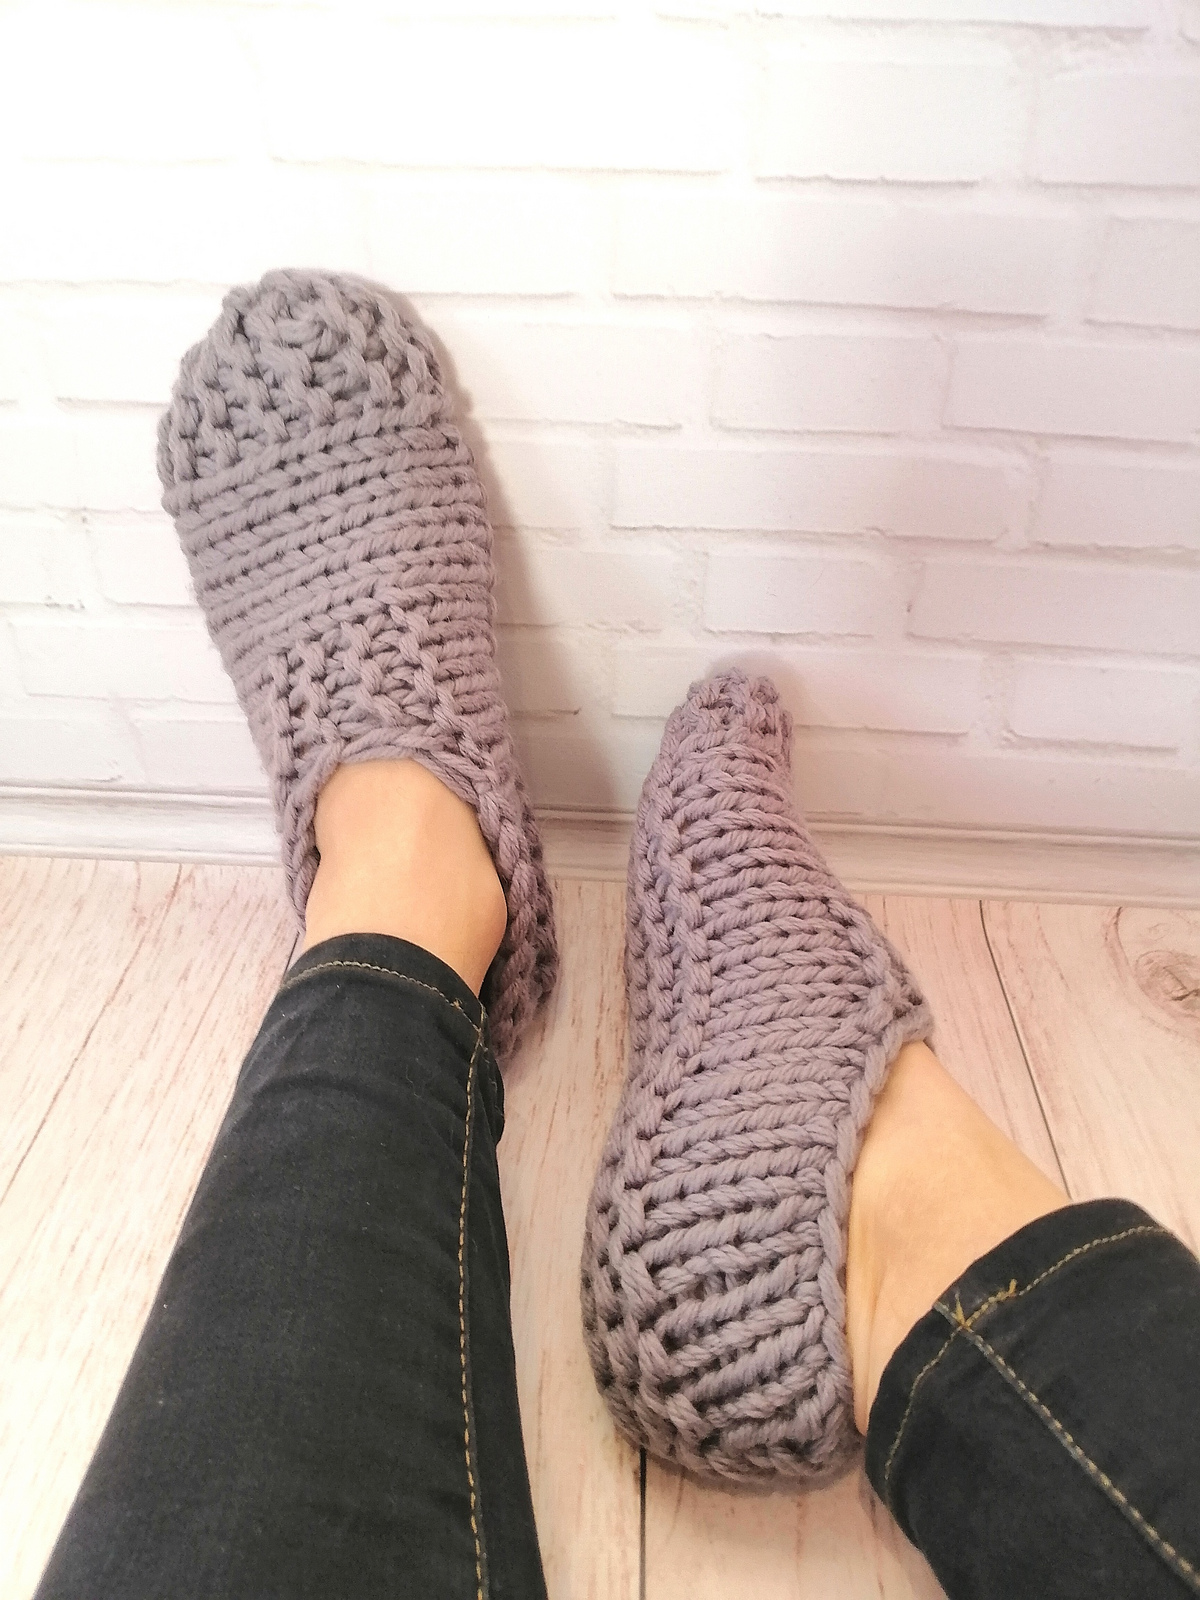 Move Over Sweater Weather ... How About Knitting A Pair Of These Cozy Slippers!